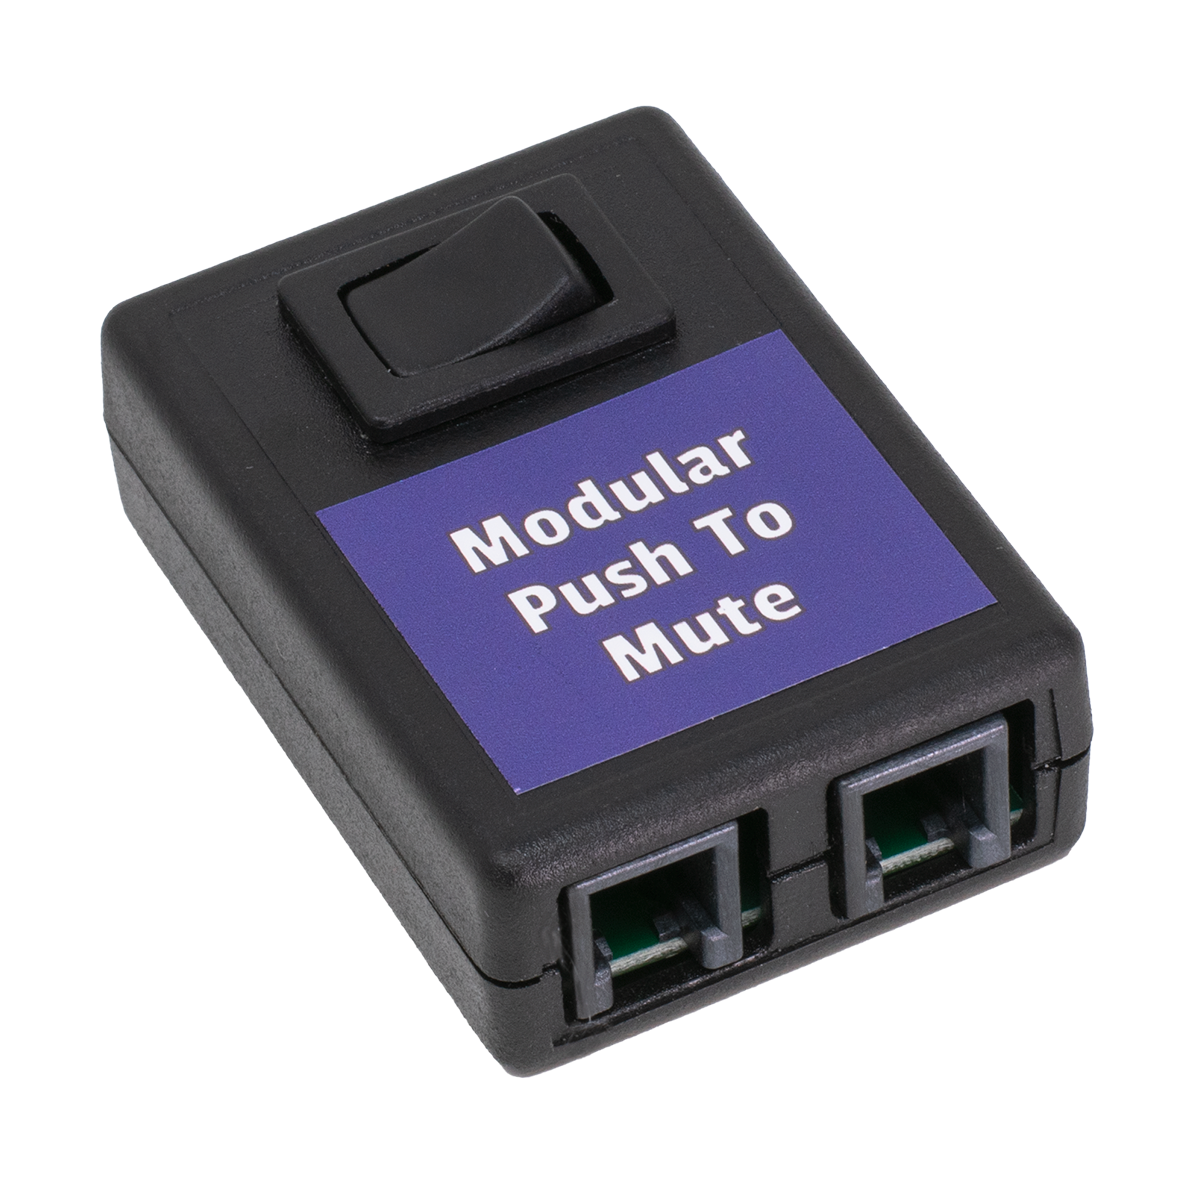 Modular Push-To-Mute Switch (Front View)